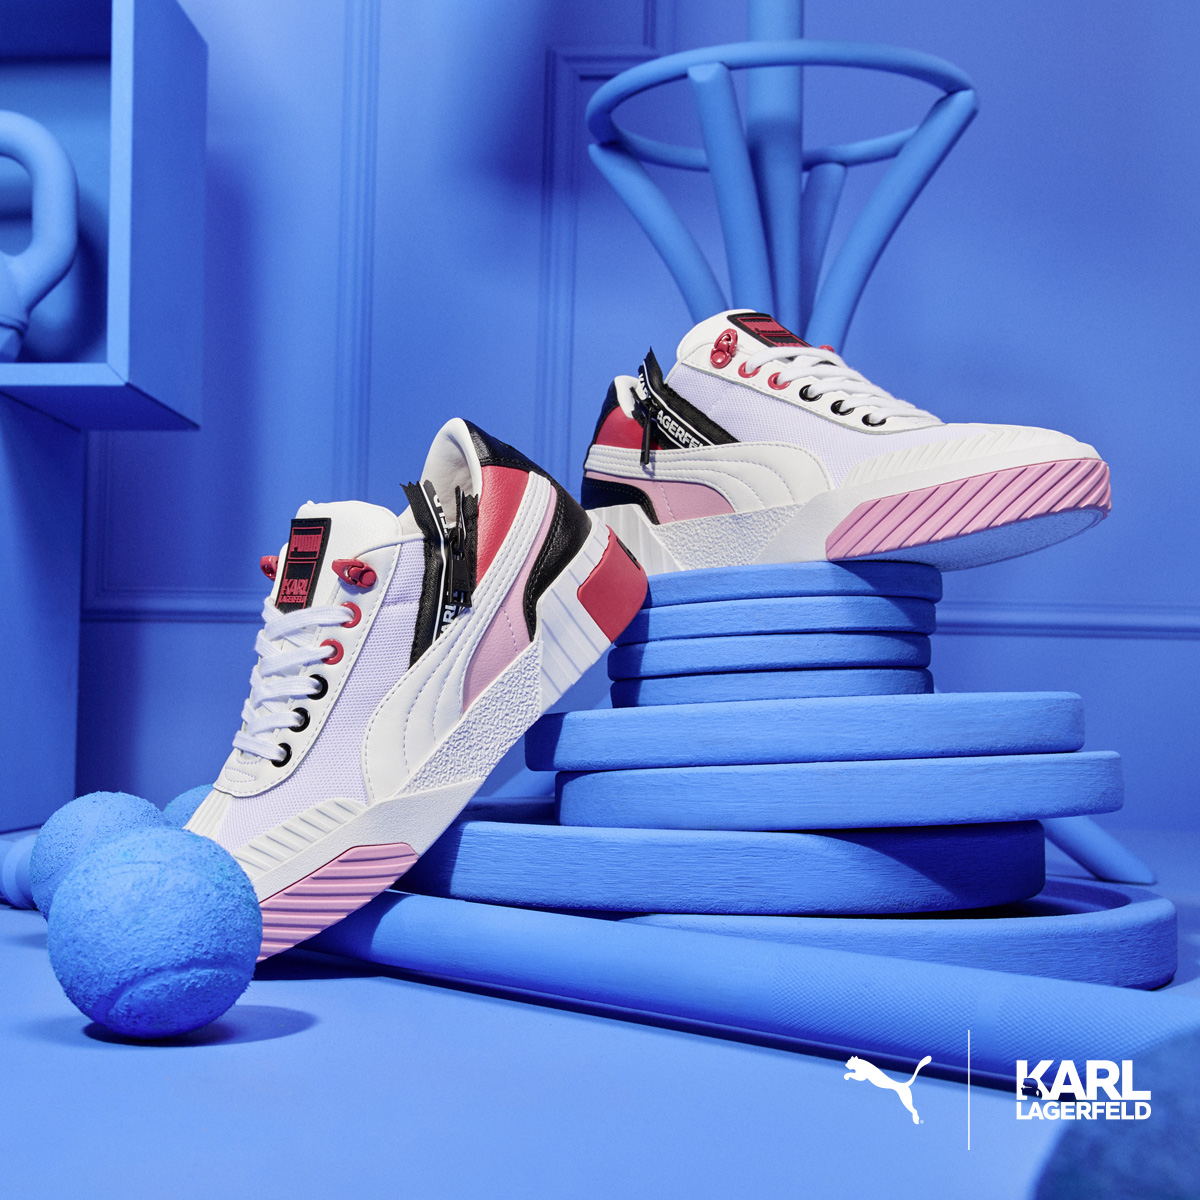 PUMA KARL LAGERFELD: SOPHISTICATION AT ITS FINEST